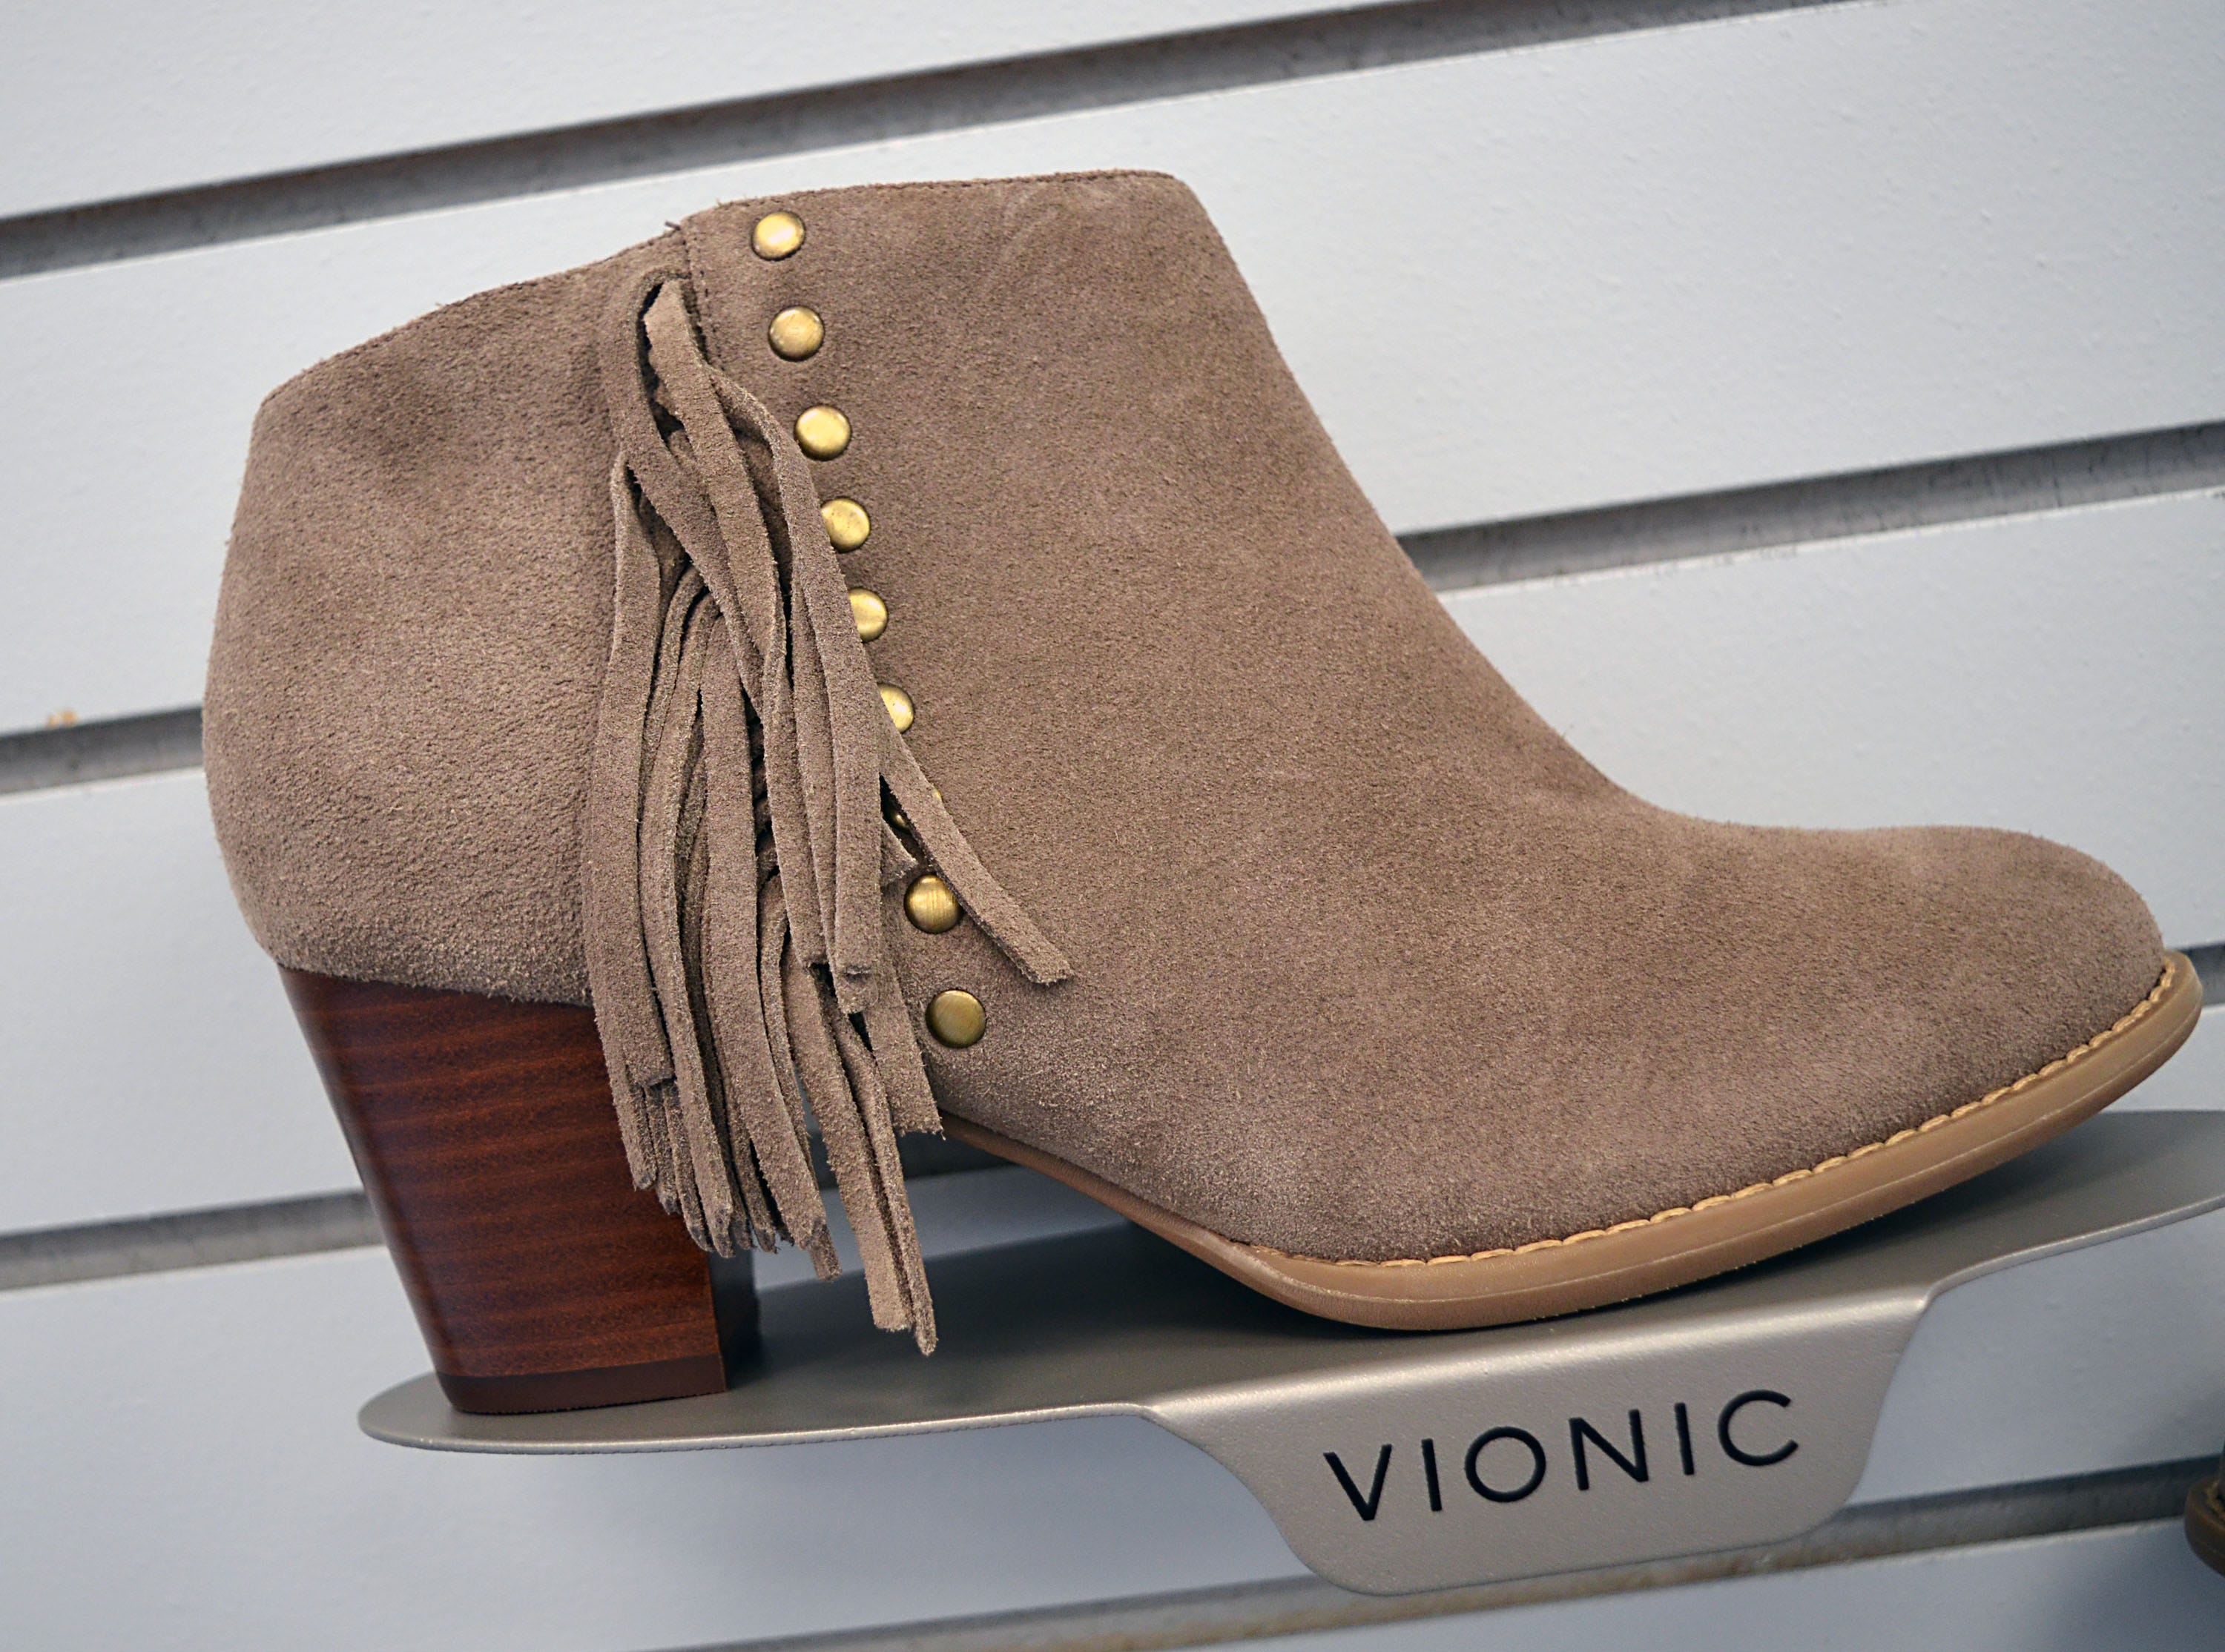 what stores sell vionic shoes